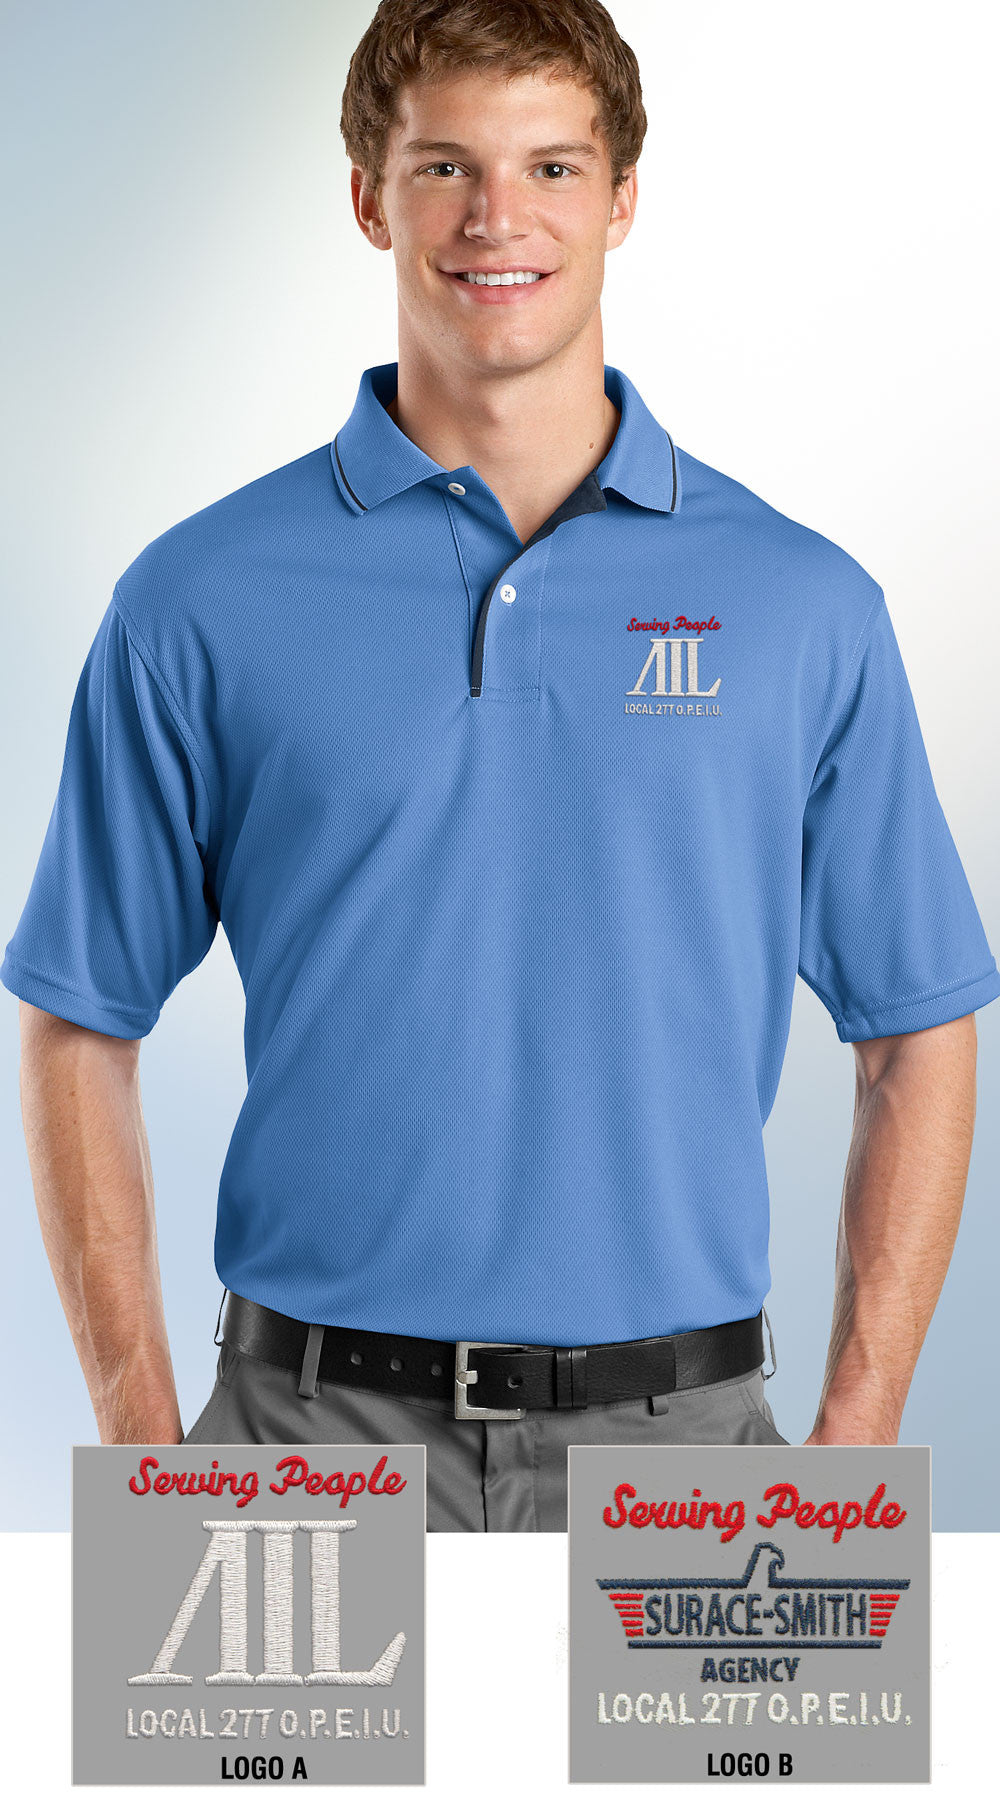 Sport-Tek K467 Dri-Mesh Polo with Tipped Collar and Piping